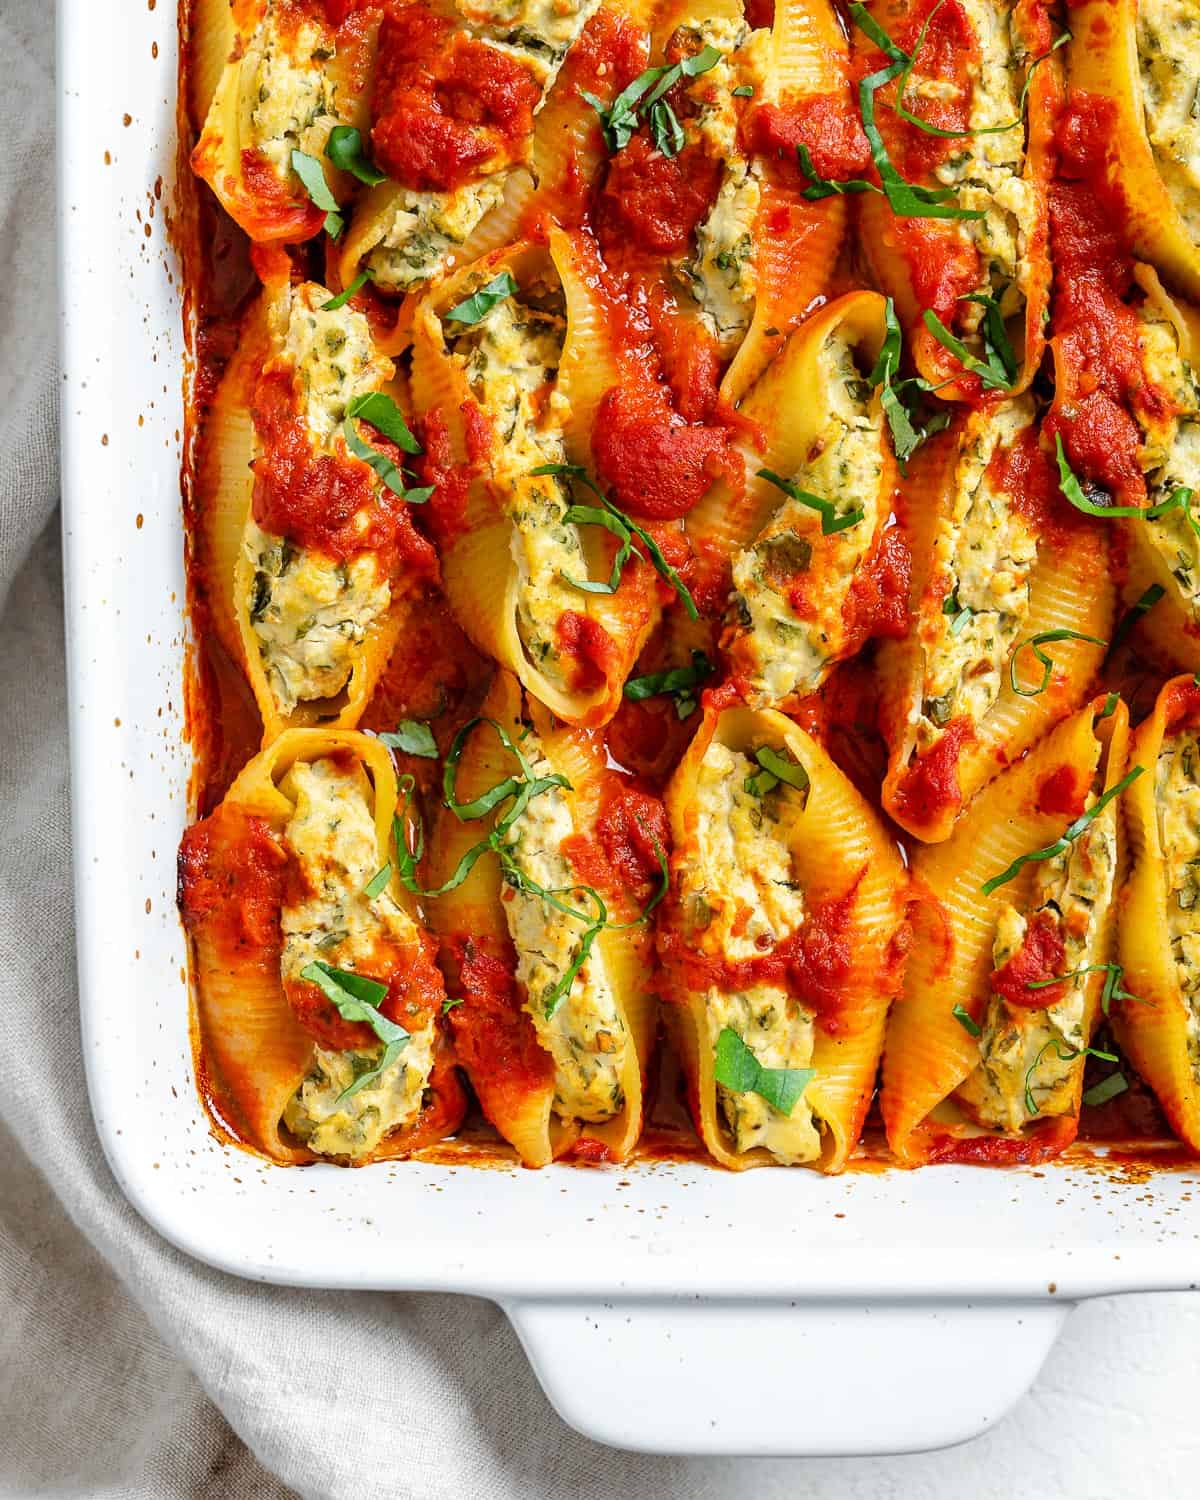 These Stuffed Shells are the ultimate delicious comfort food! Everyone will enjoy this tasty, wholesome meal. #plantbasedonabudget #stuffed #shells #dinner #vegan.